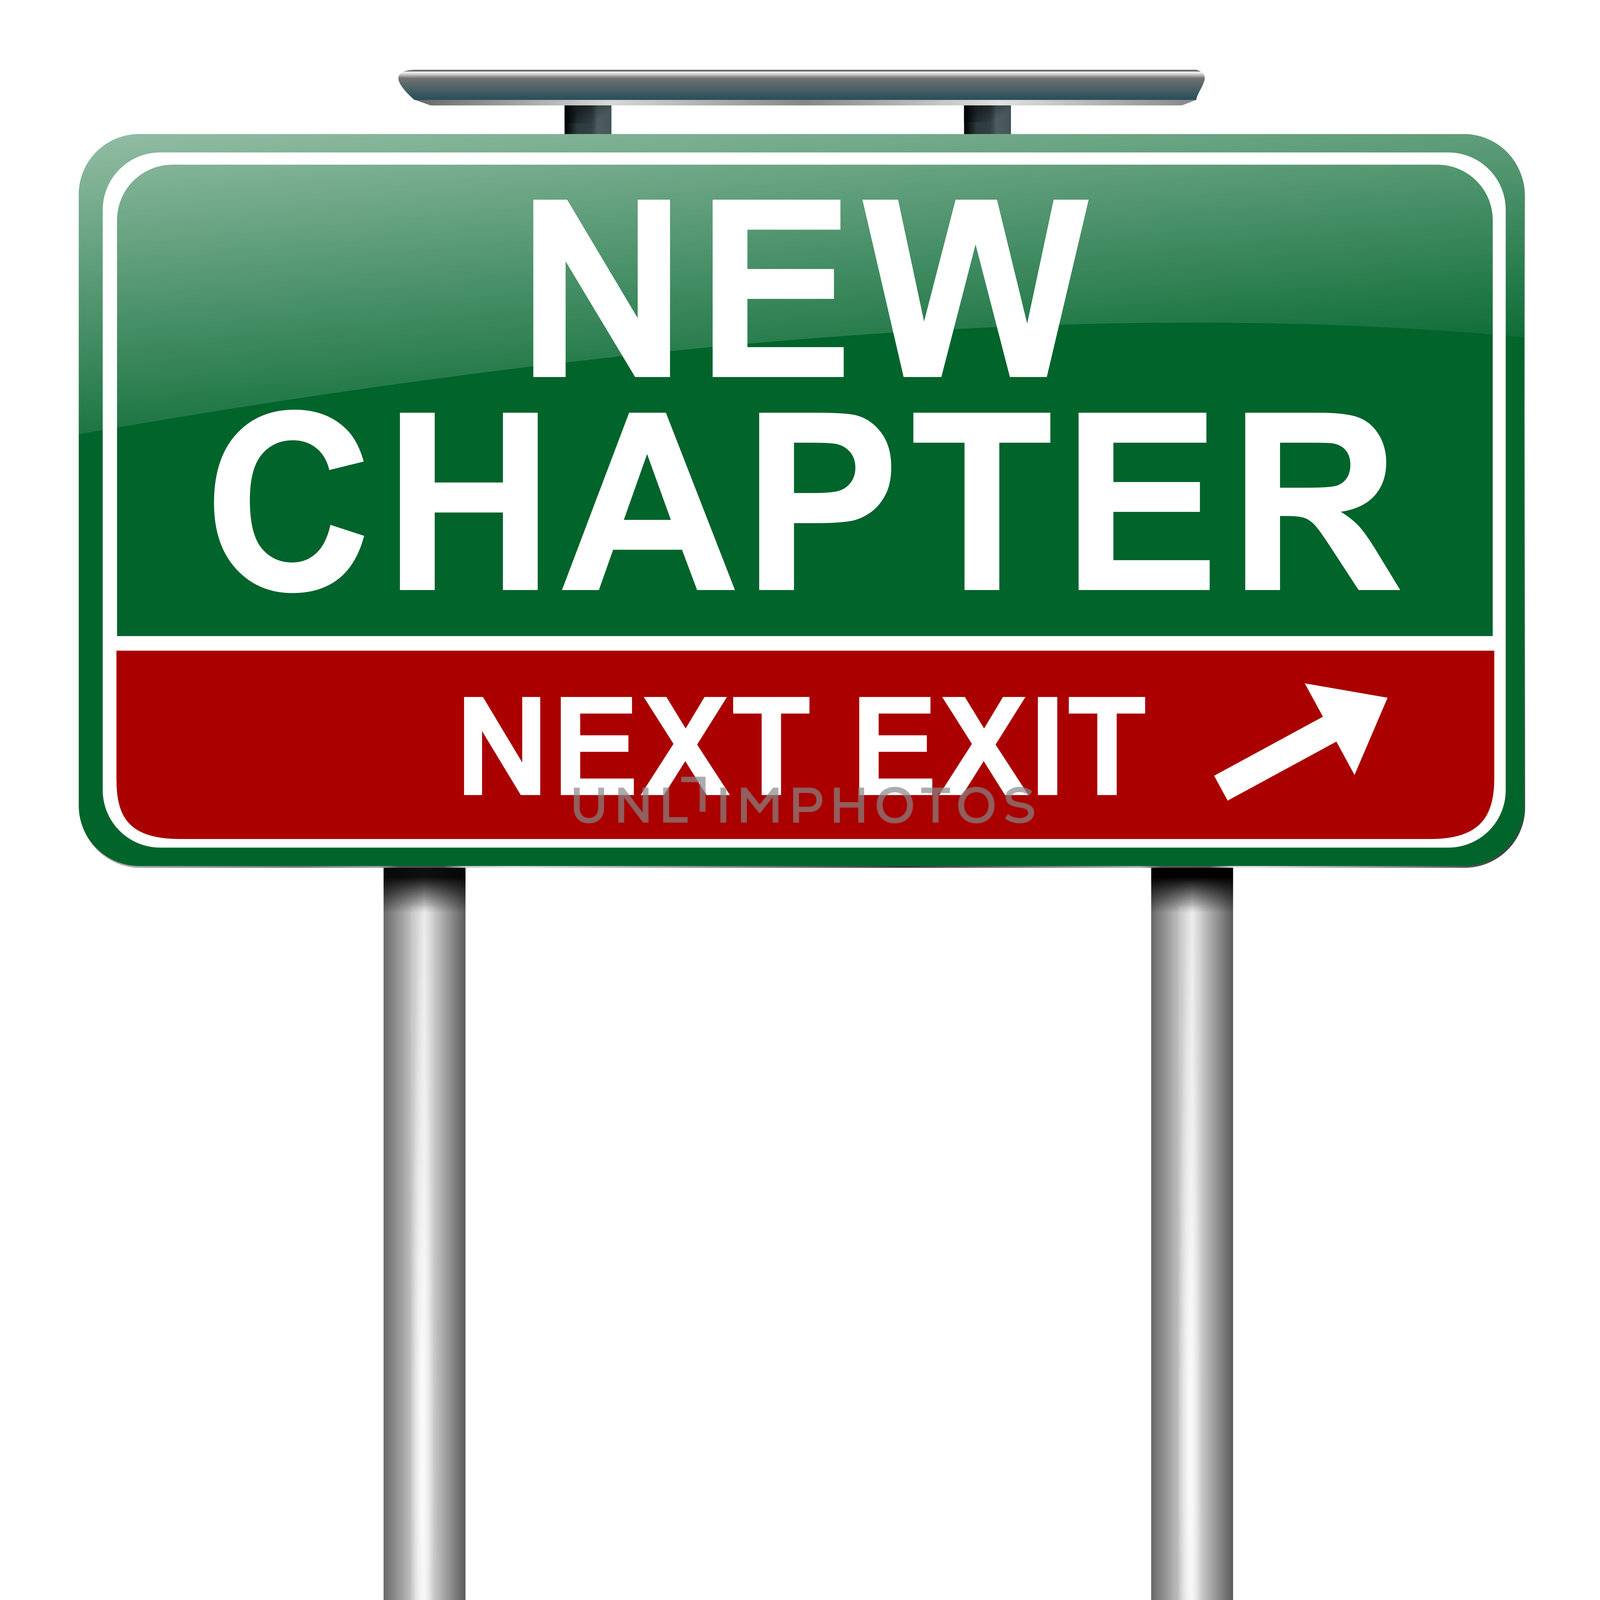 Illustration depicting a roadsign with a new chapter concept. White background.